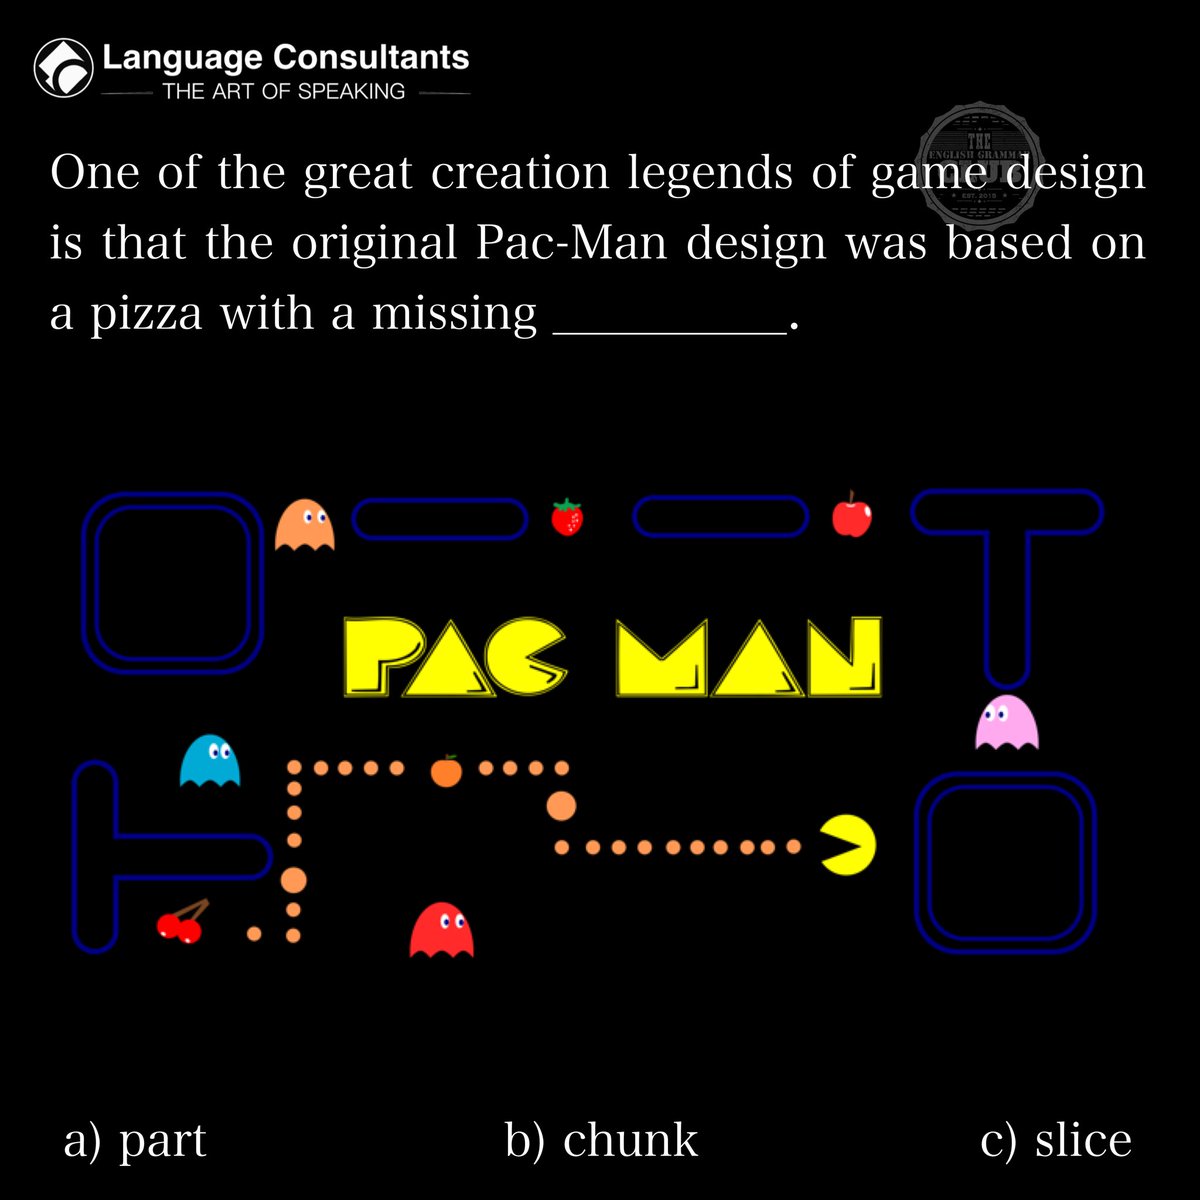 #english 🇬🇧 #englishlearning #learnenglish #languagelearning #englishonline #italianonline #language #consultants #business #pacman #pacmanghost #retrogaming #retrogames #videogames #arcade